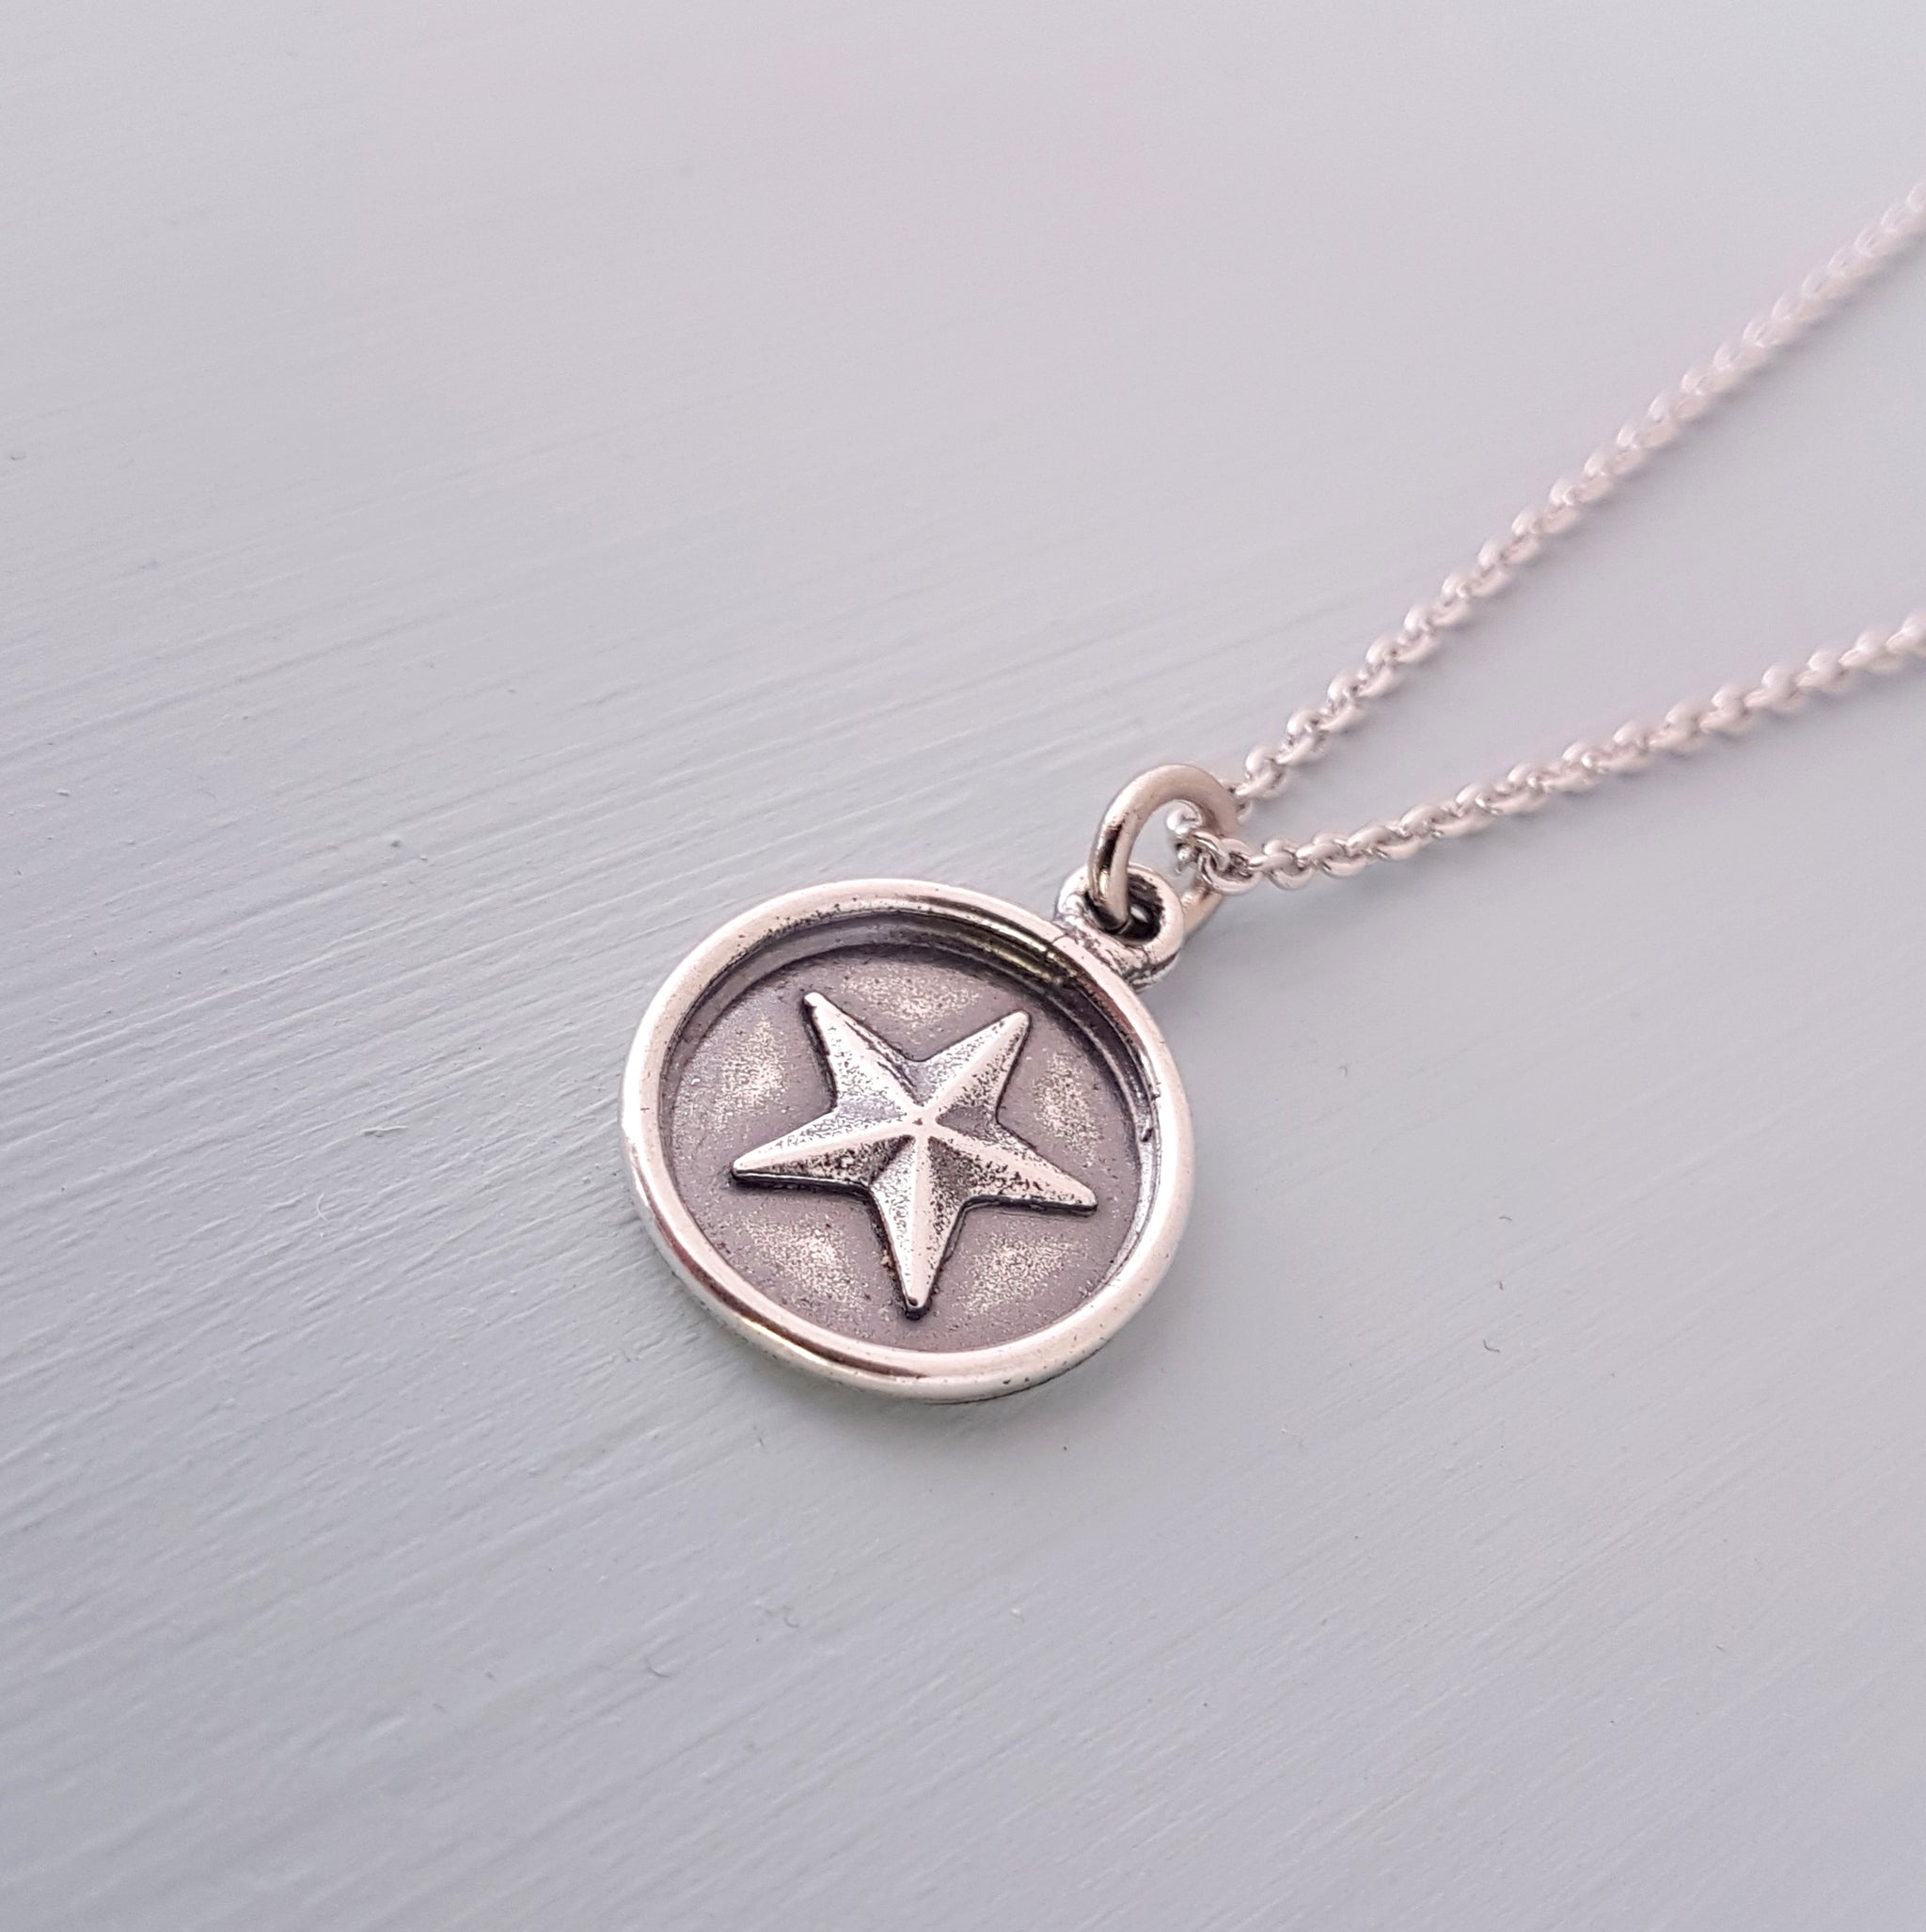 Wax Seal Star Necklace - Gwen Delicious Jewelry Designs